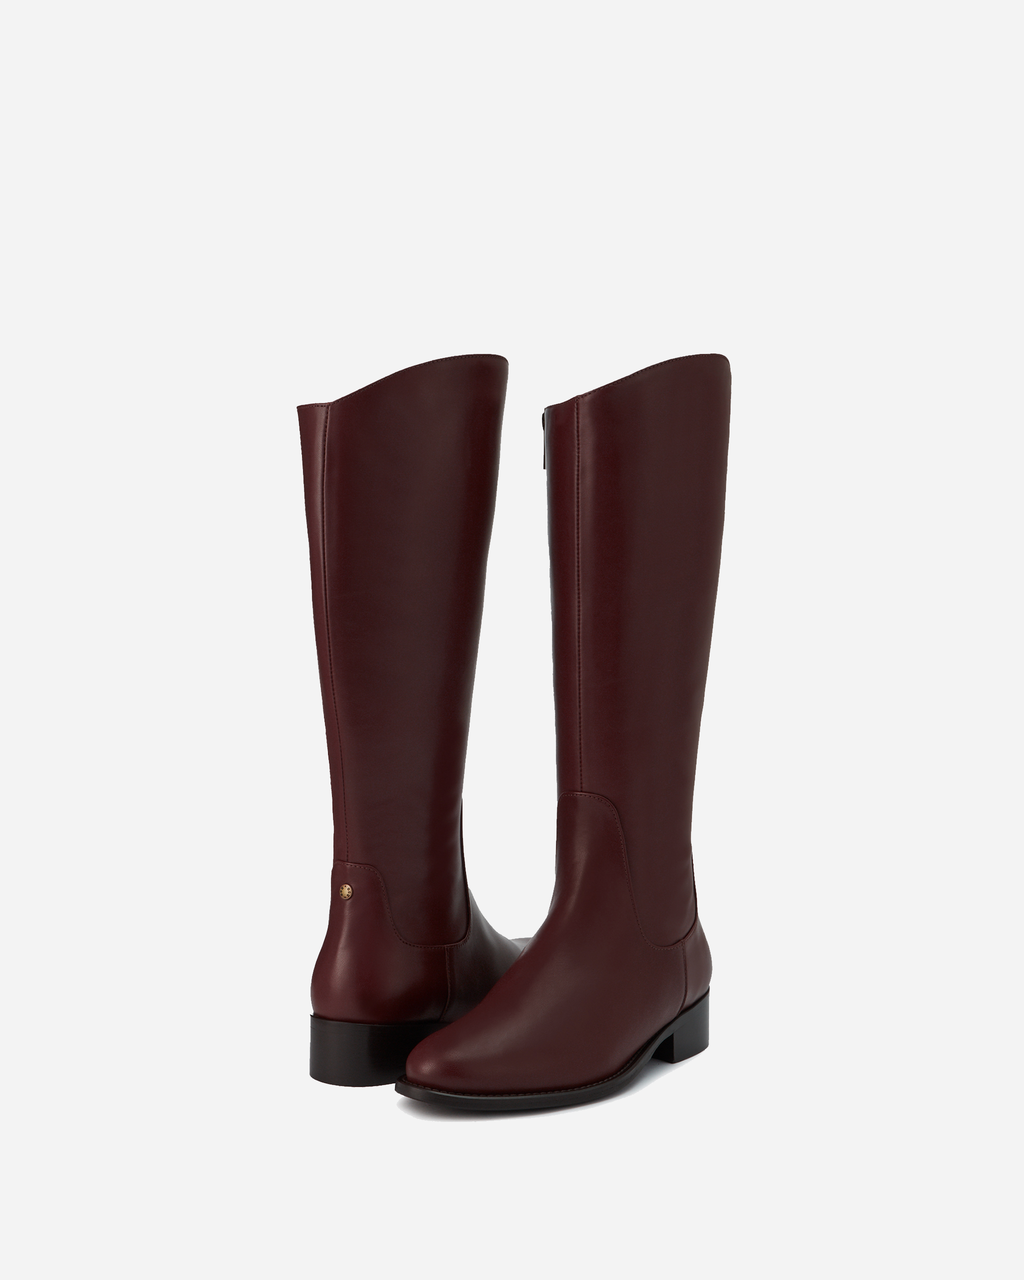 Verity Knee High Boots in Burgundy Leather – DuoBoots